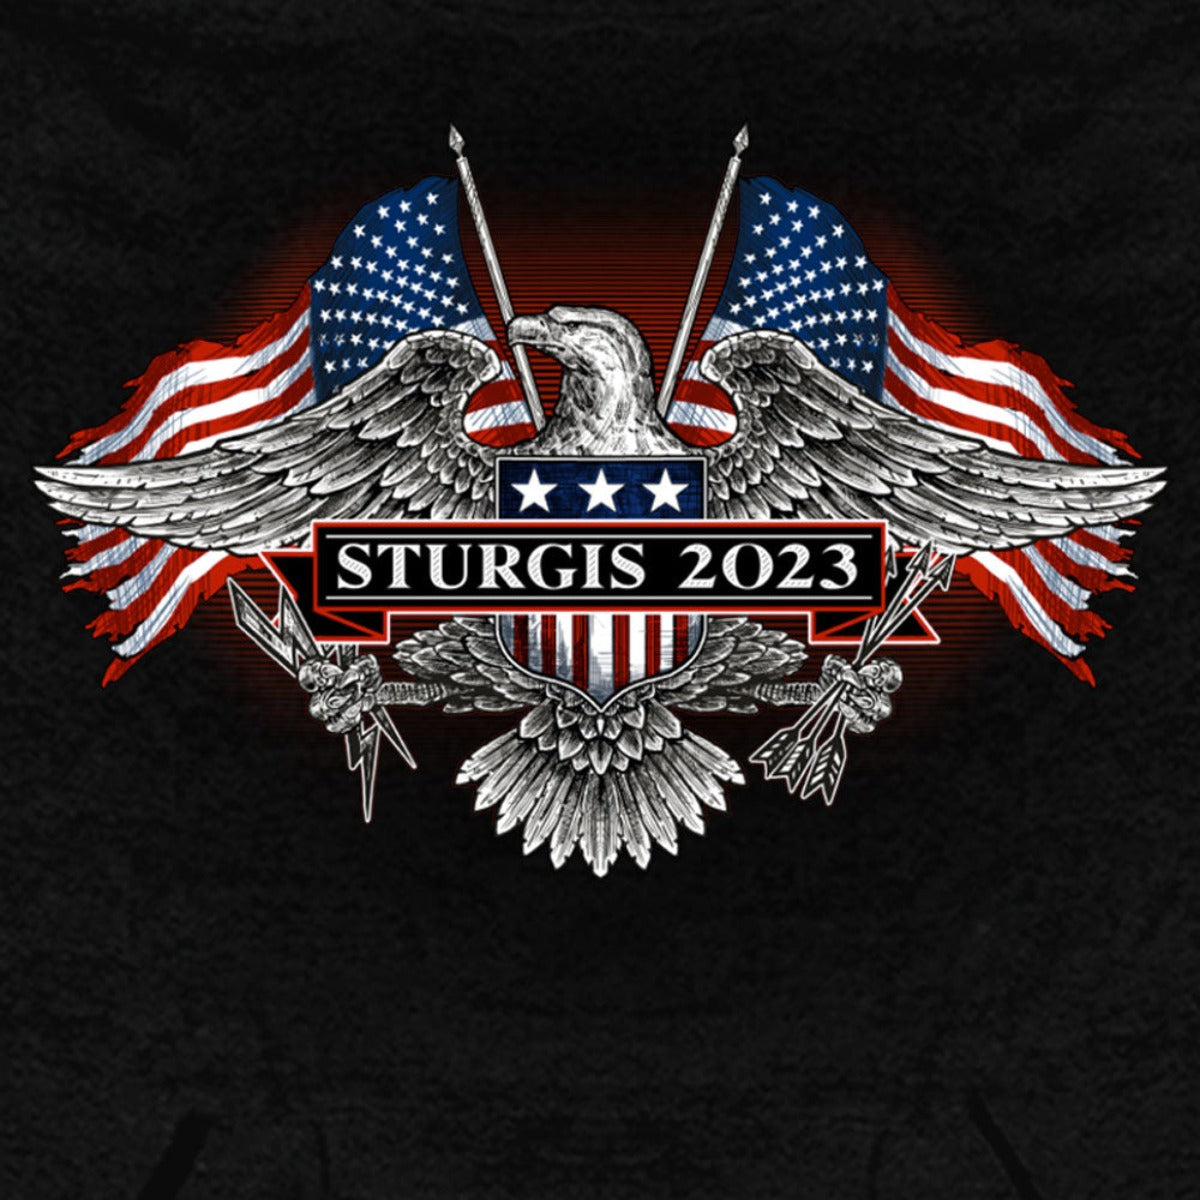 A limited edition Hot Leathers Men's Sturgis 2023 Vintage Patriot Hoodie with an eagle and American flags.